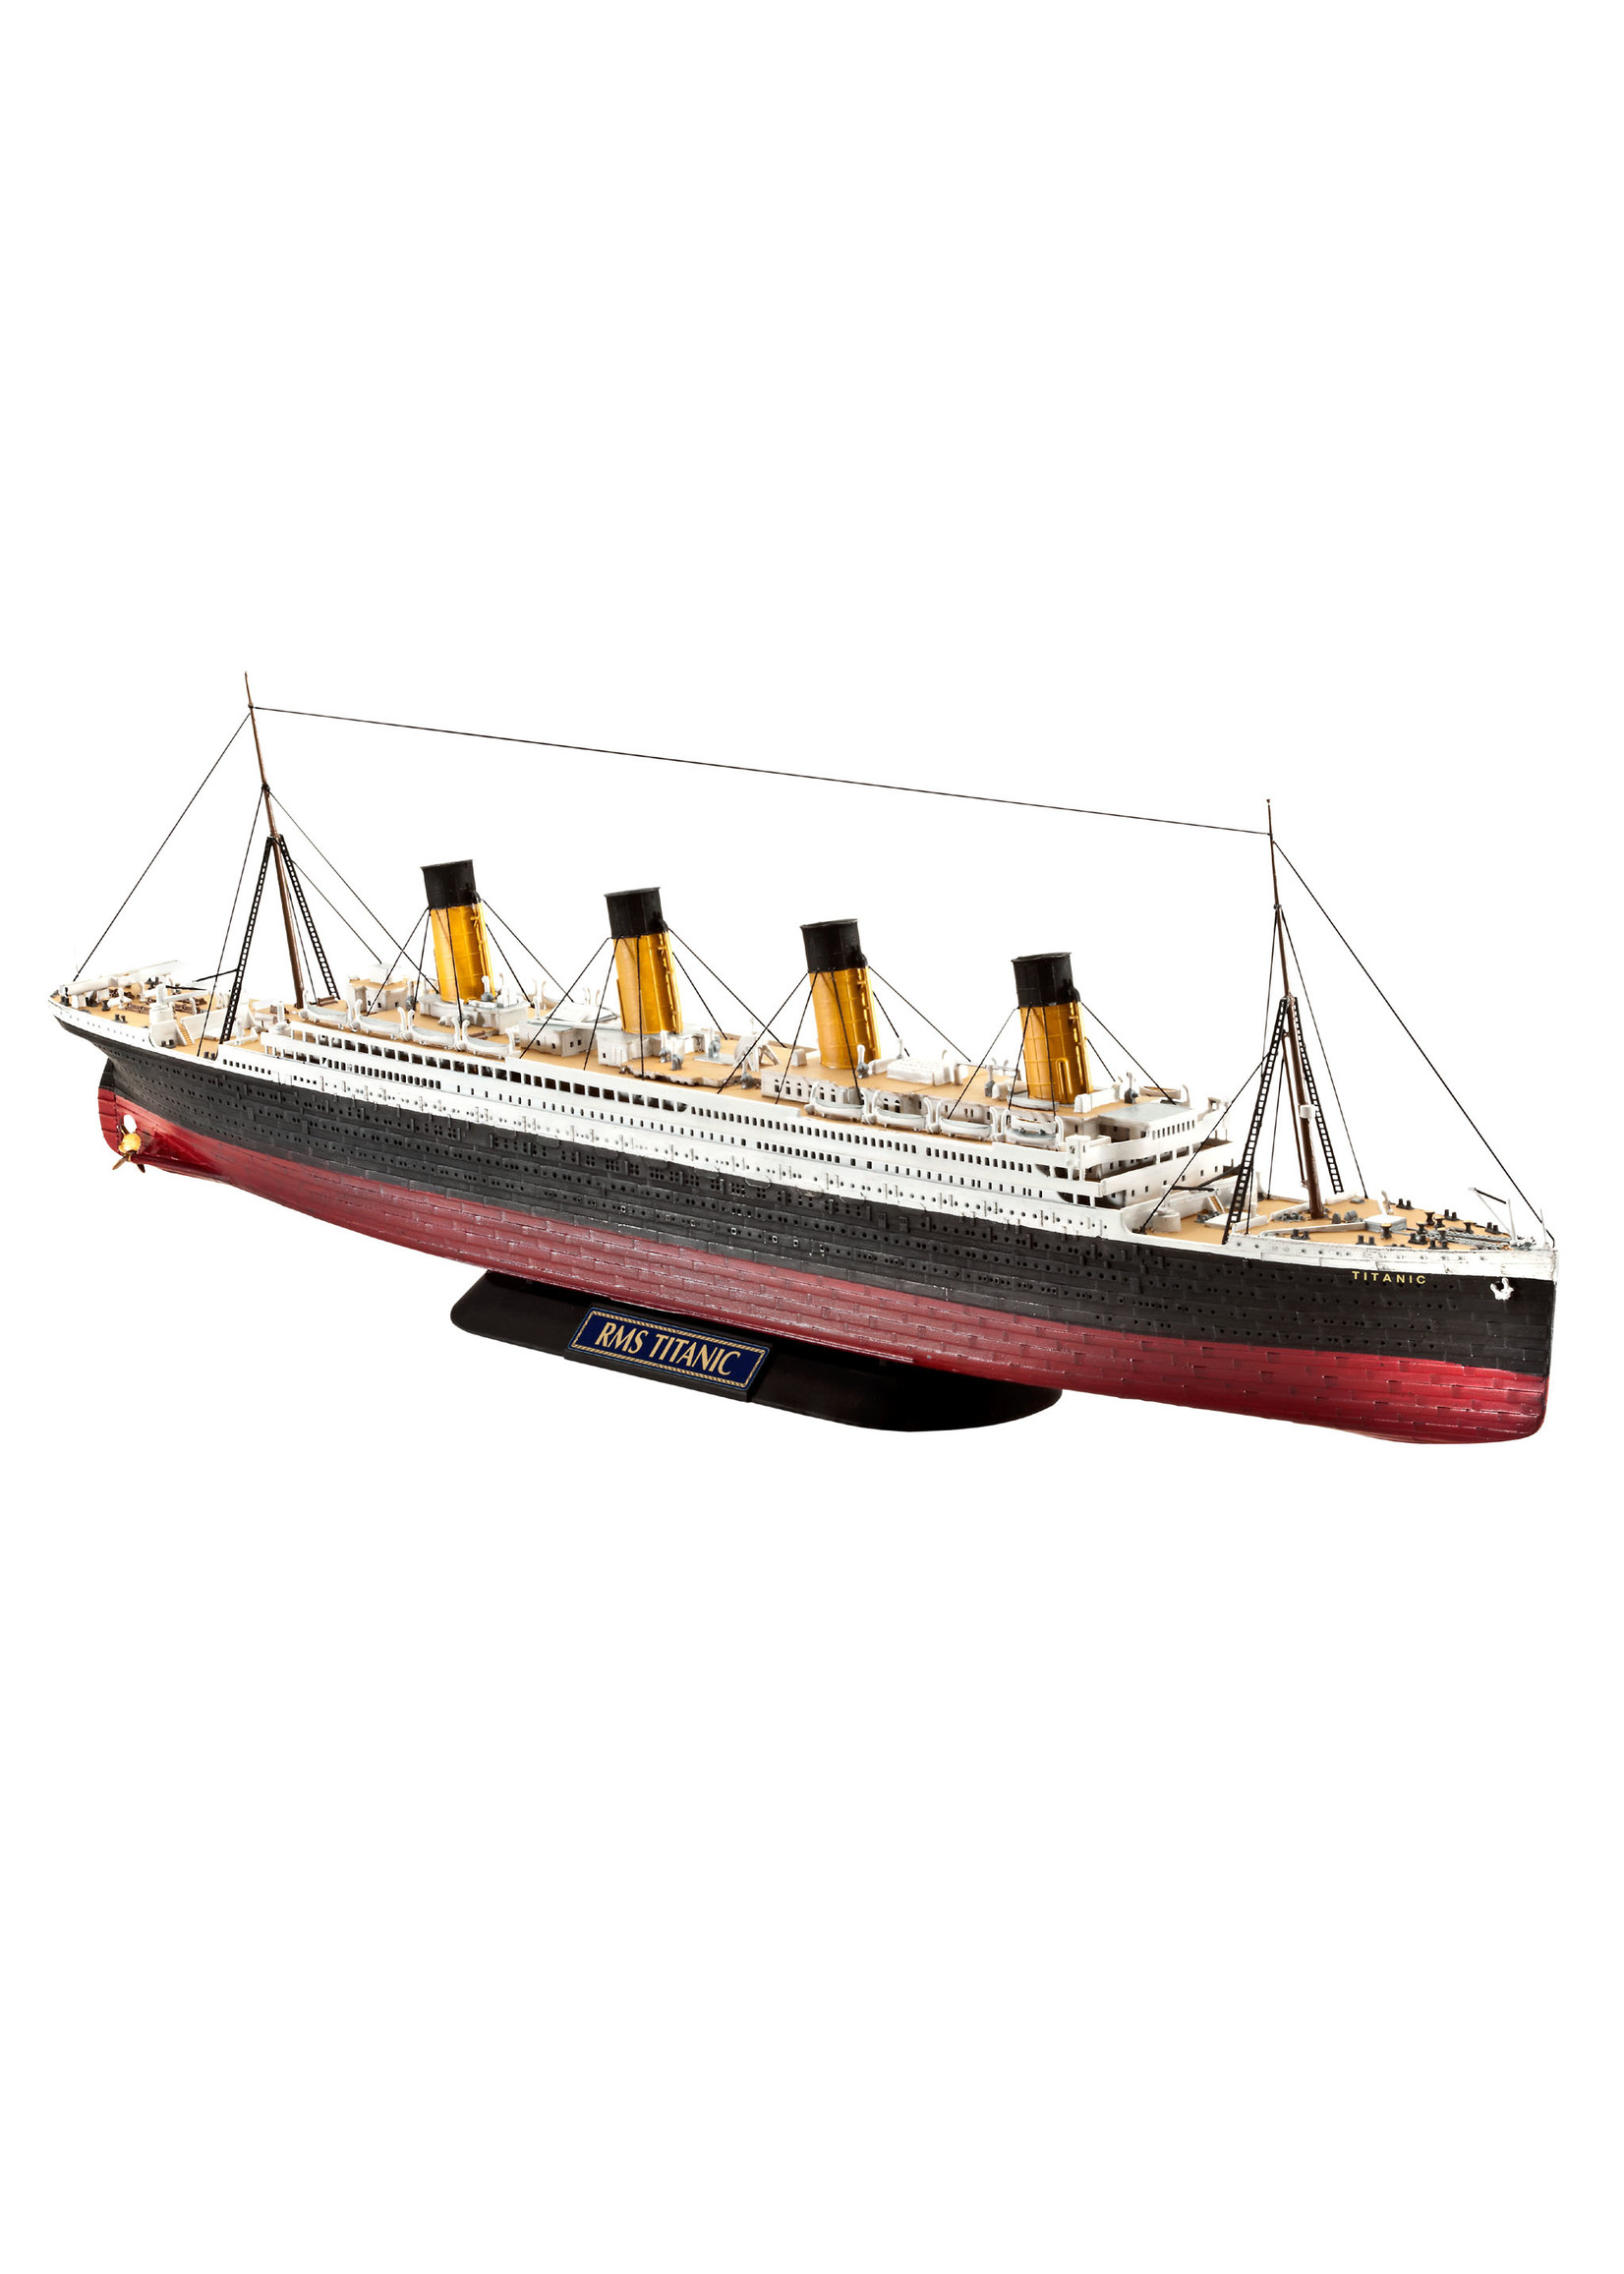 Revell of Germany 05210 - 1/700 RMS Titanic